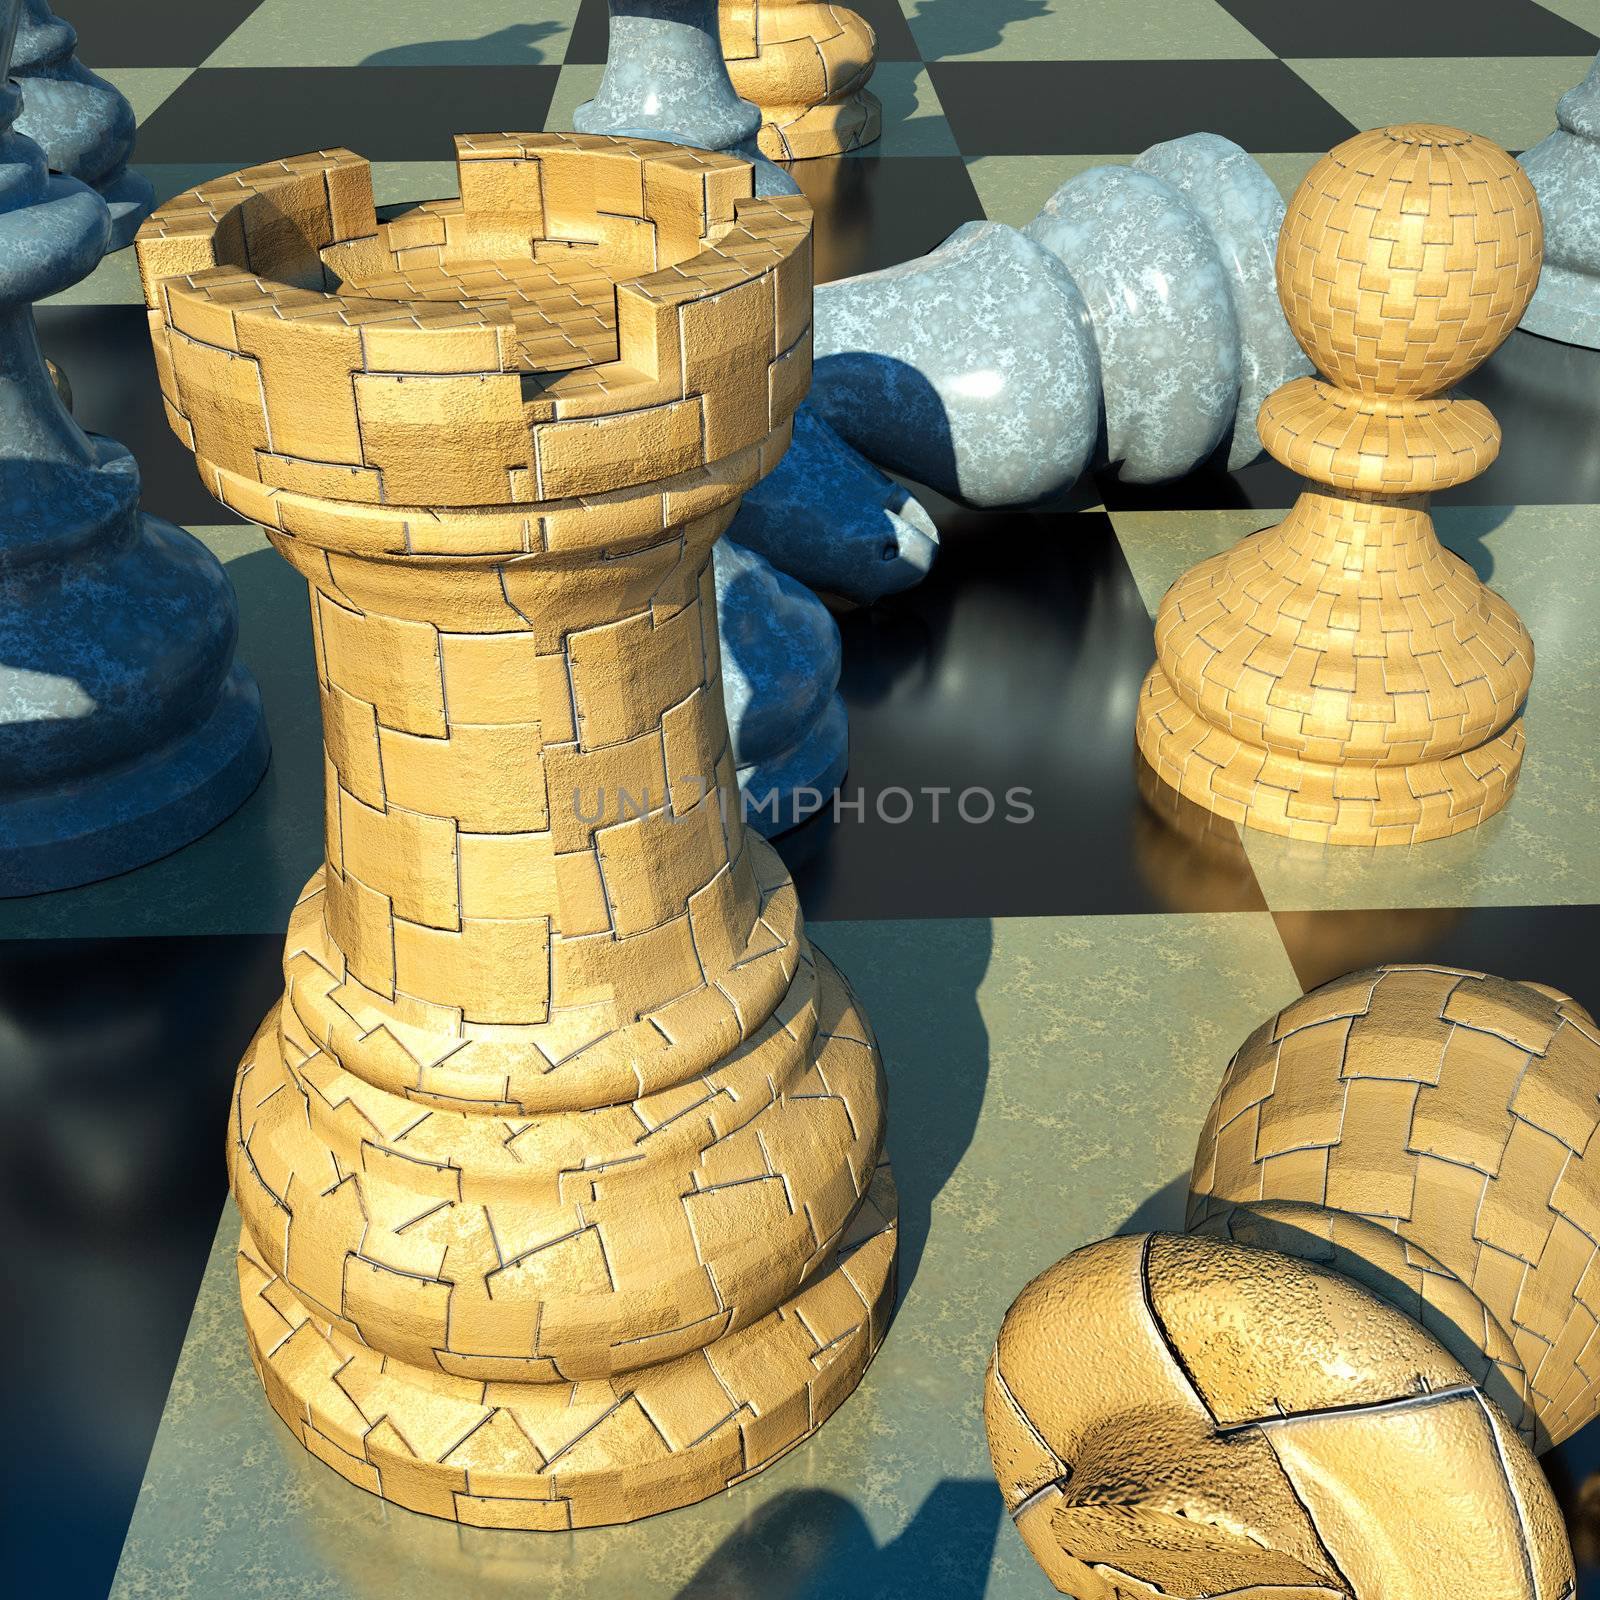 Chess battle by andromeda13